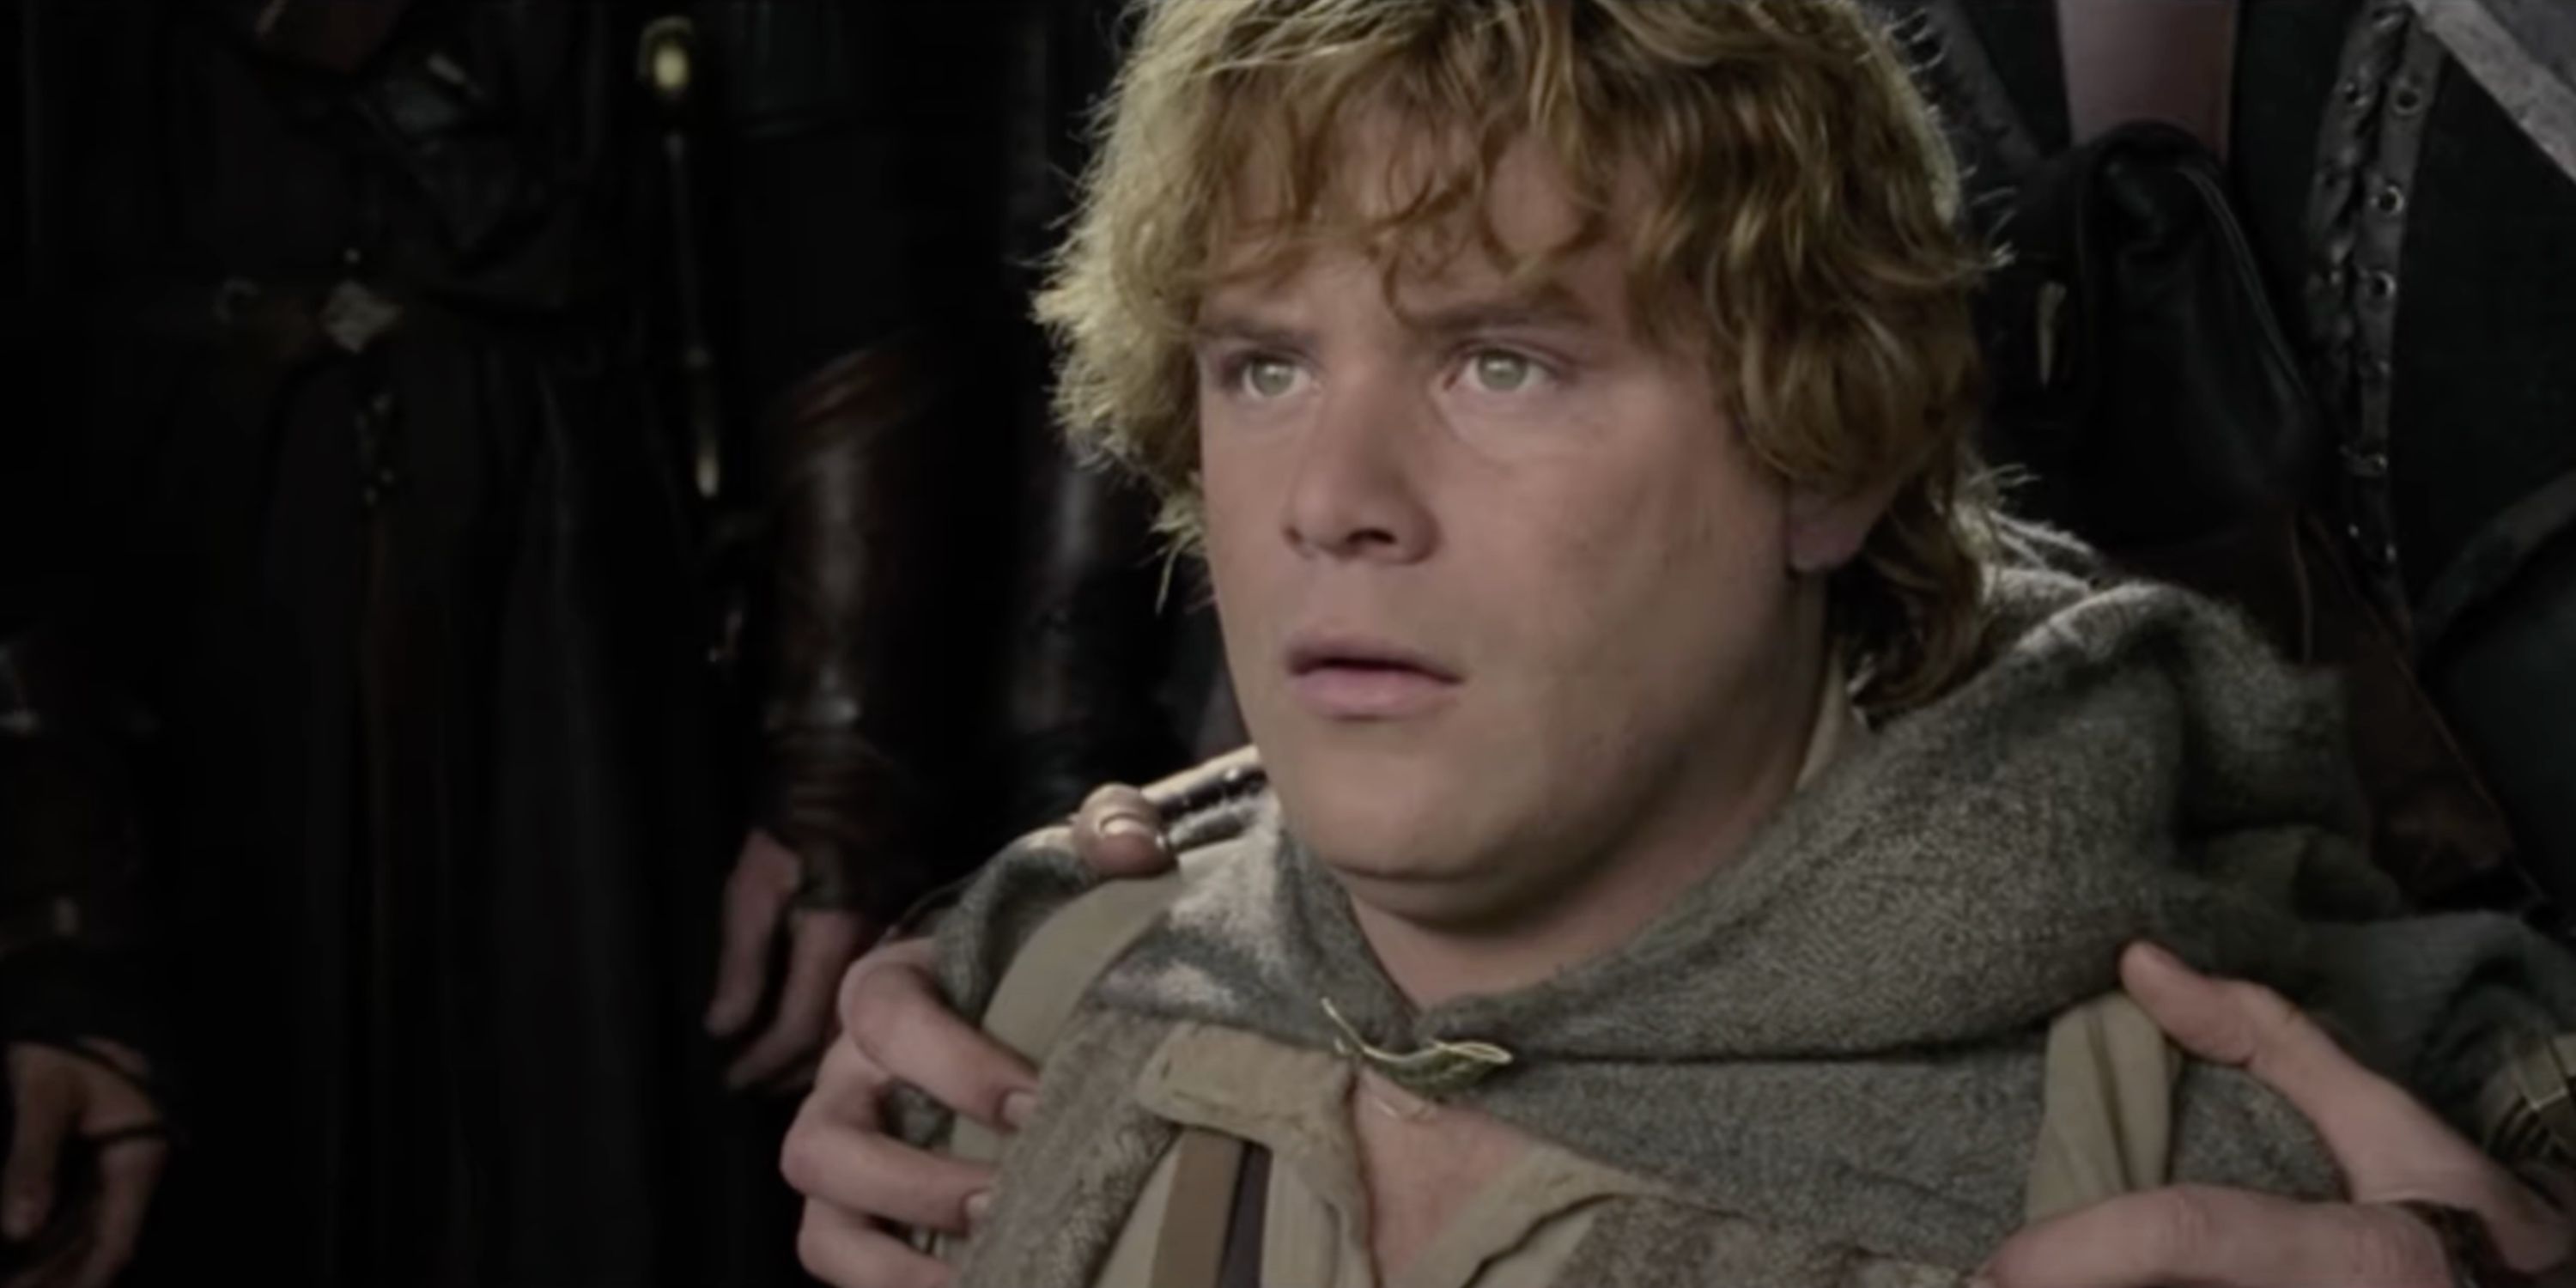 Sam angry in a scene from The Lord of the Rings: The Two Towers